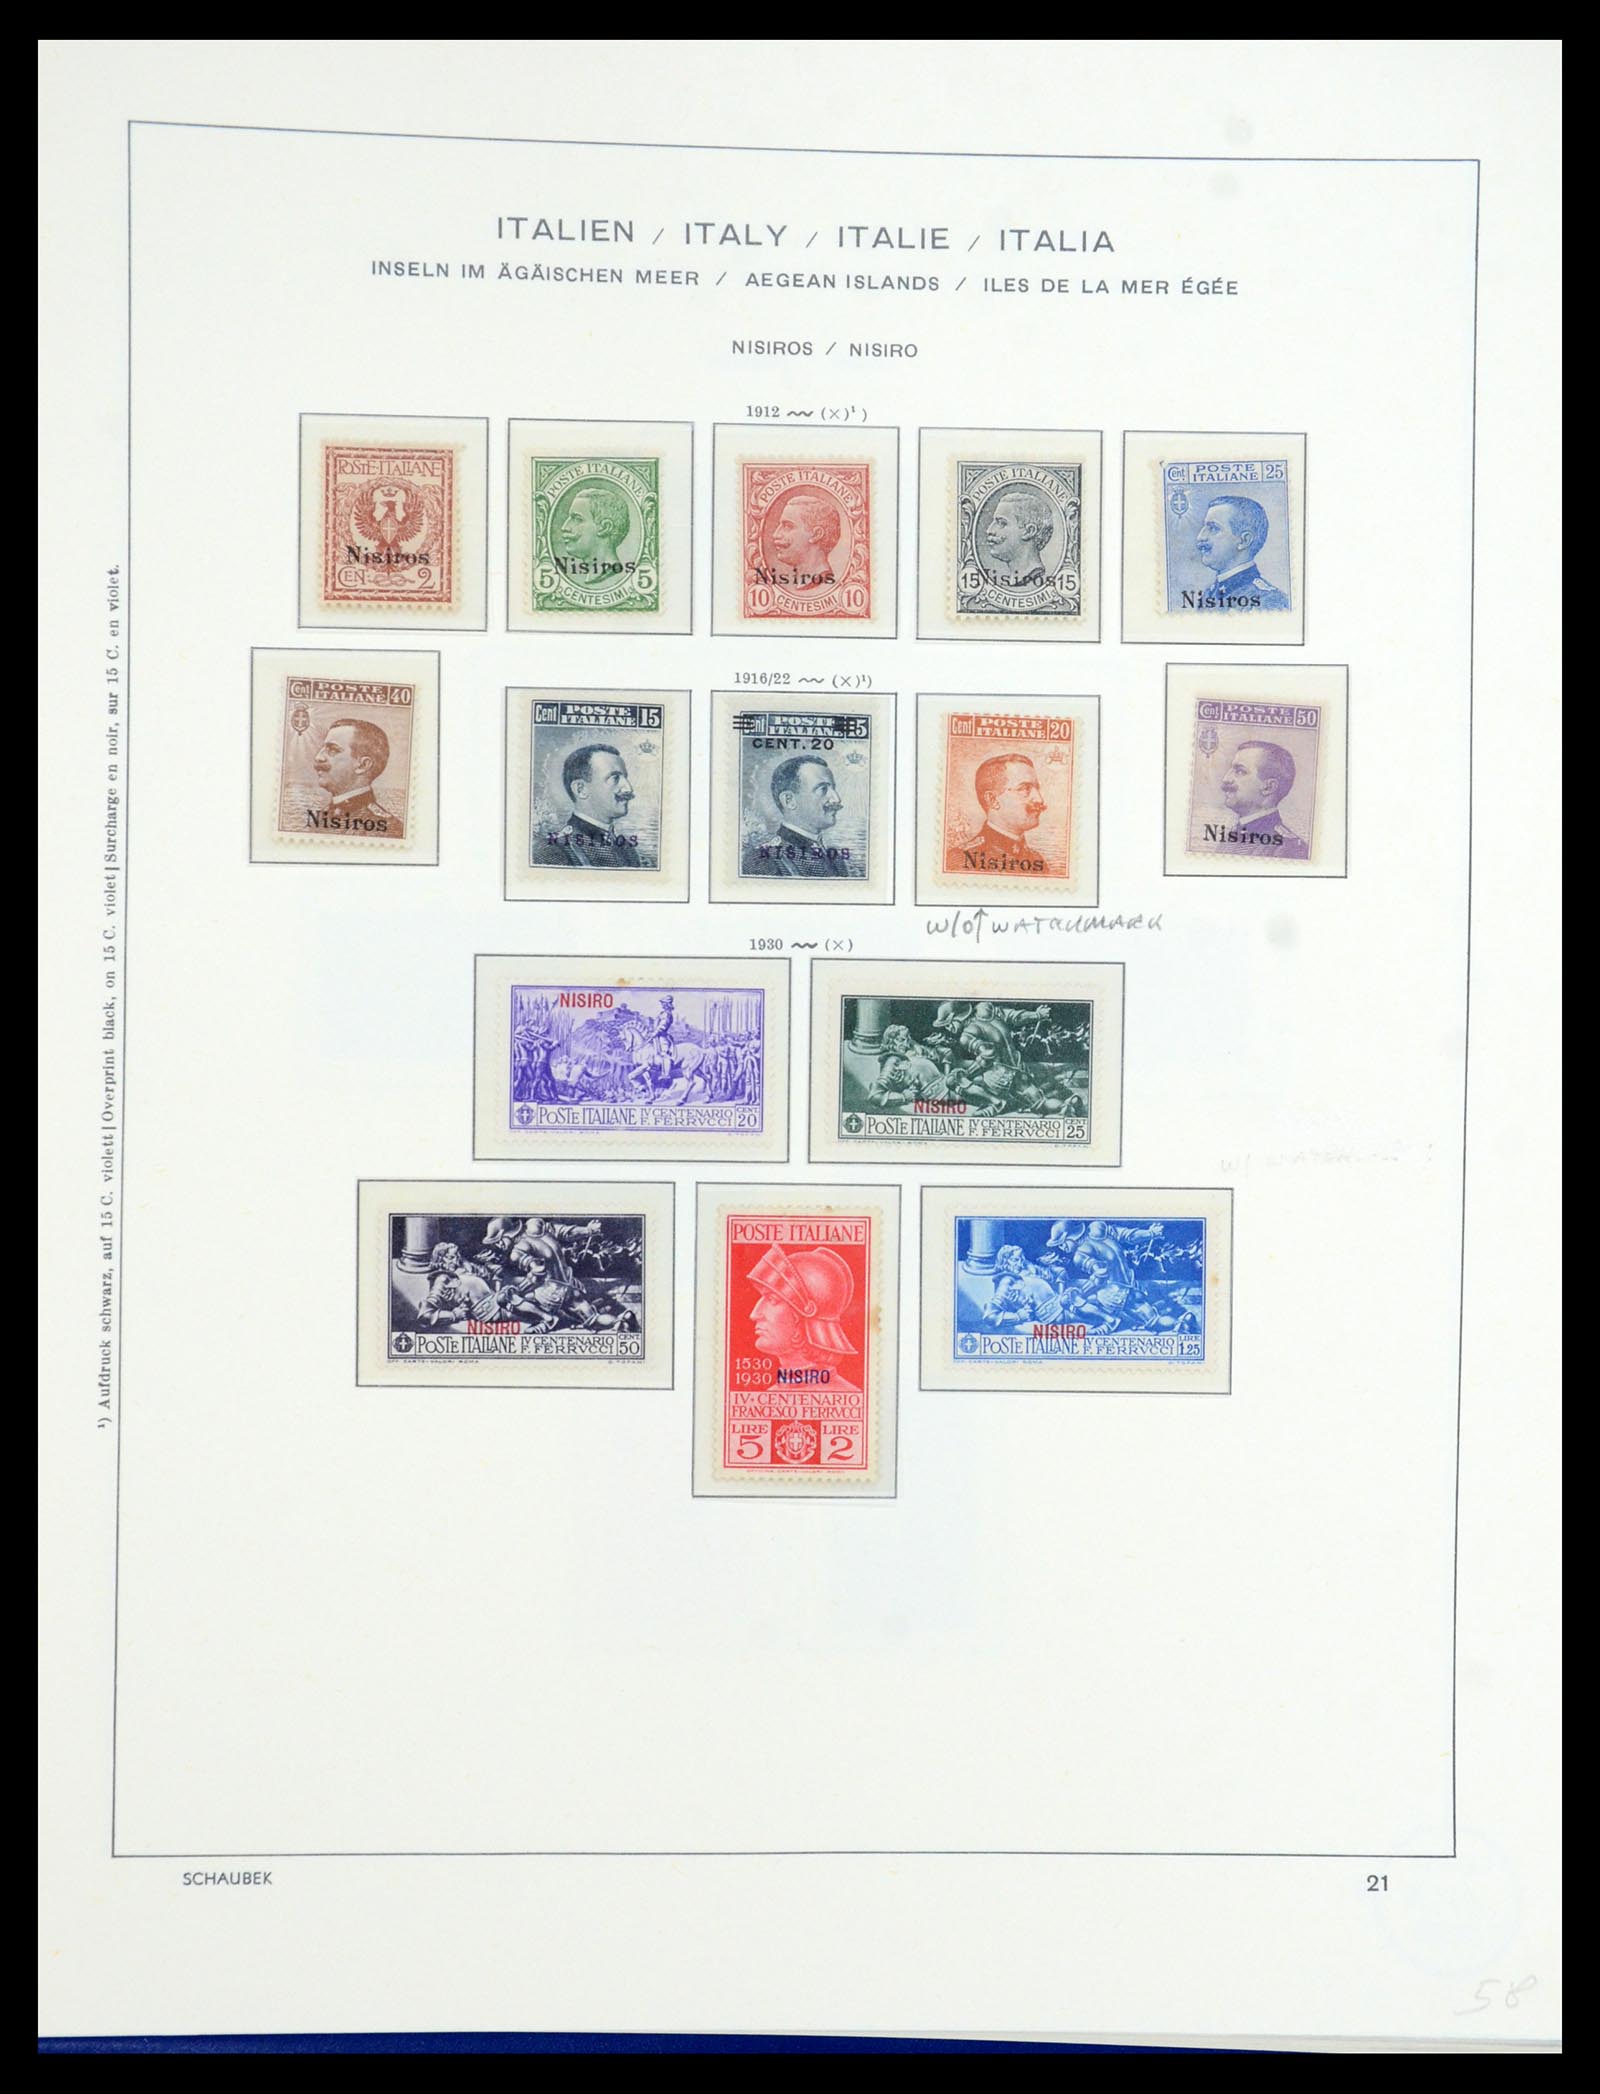 36181 026 - Stamp collection 36181 Italian Aegean Islands 1912-1941.